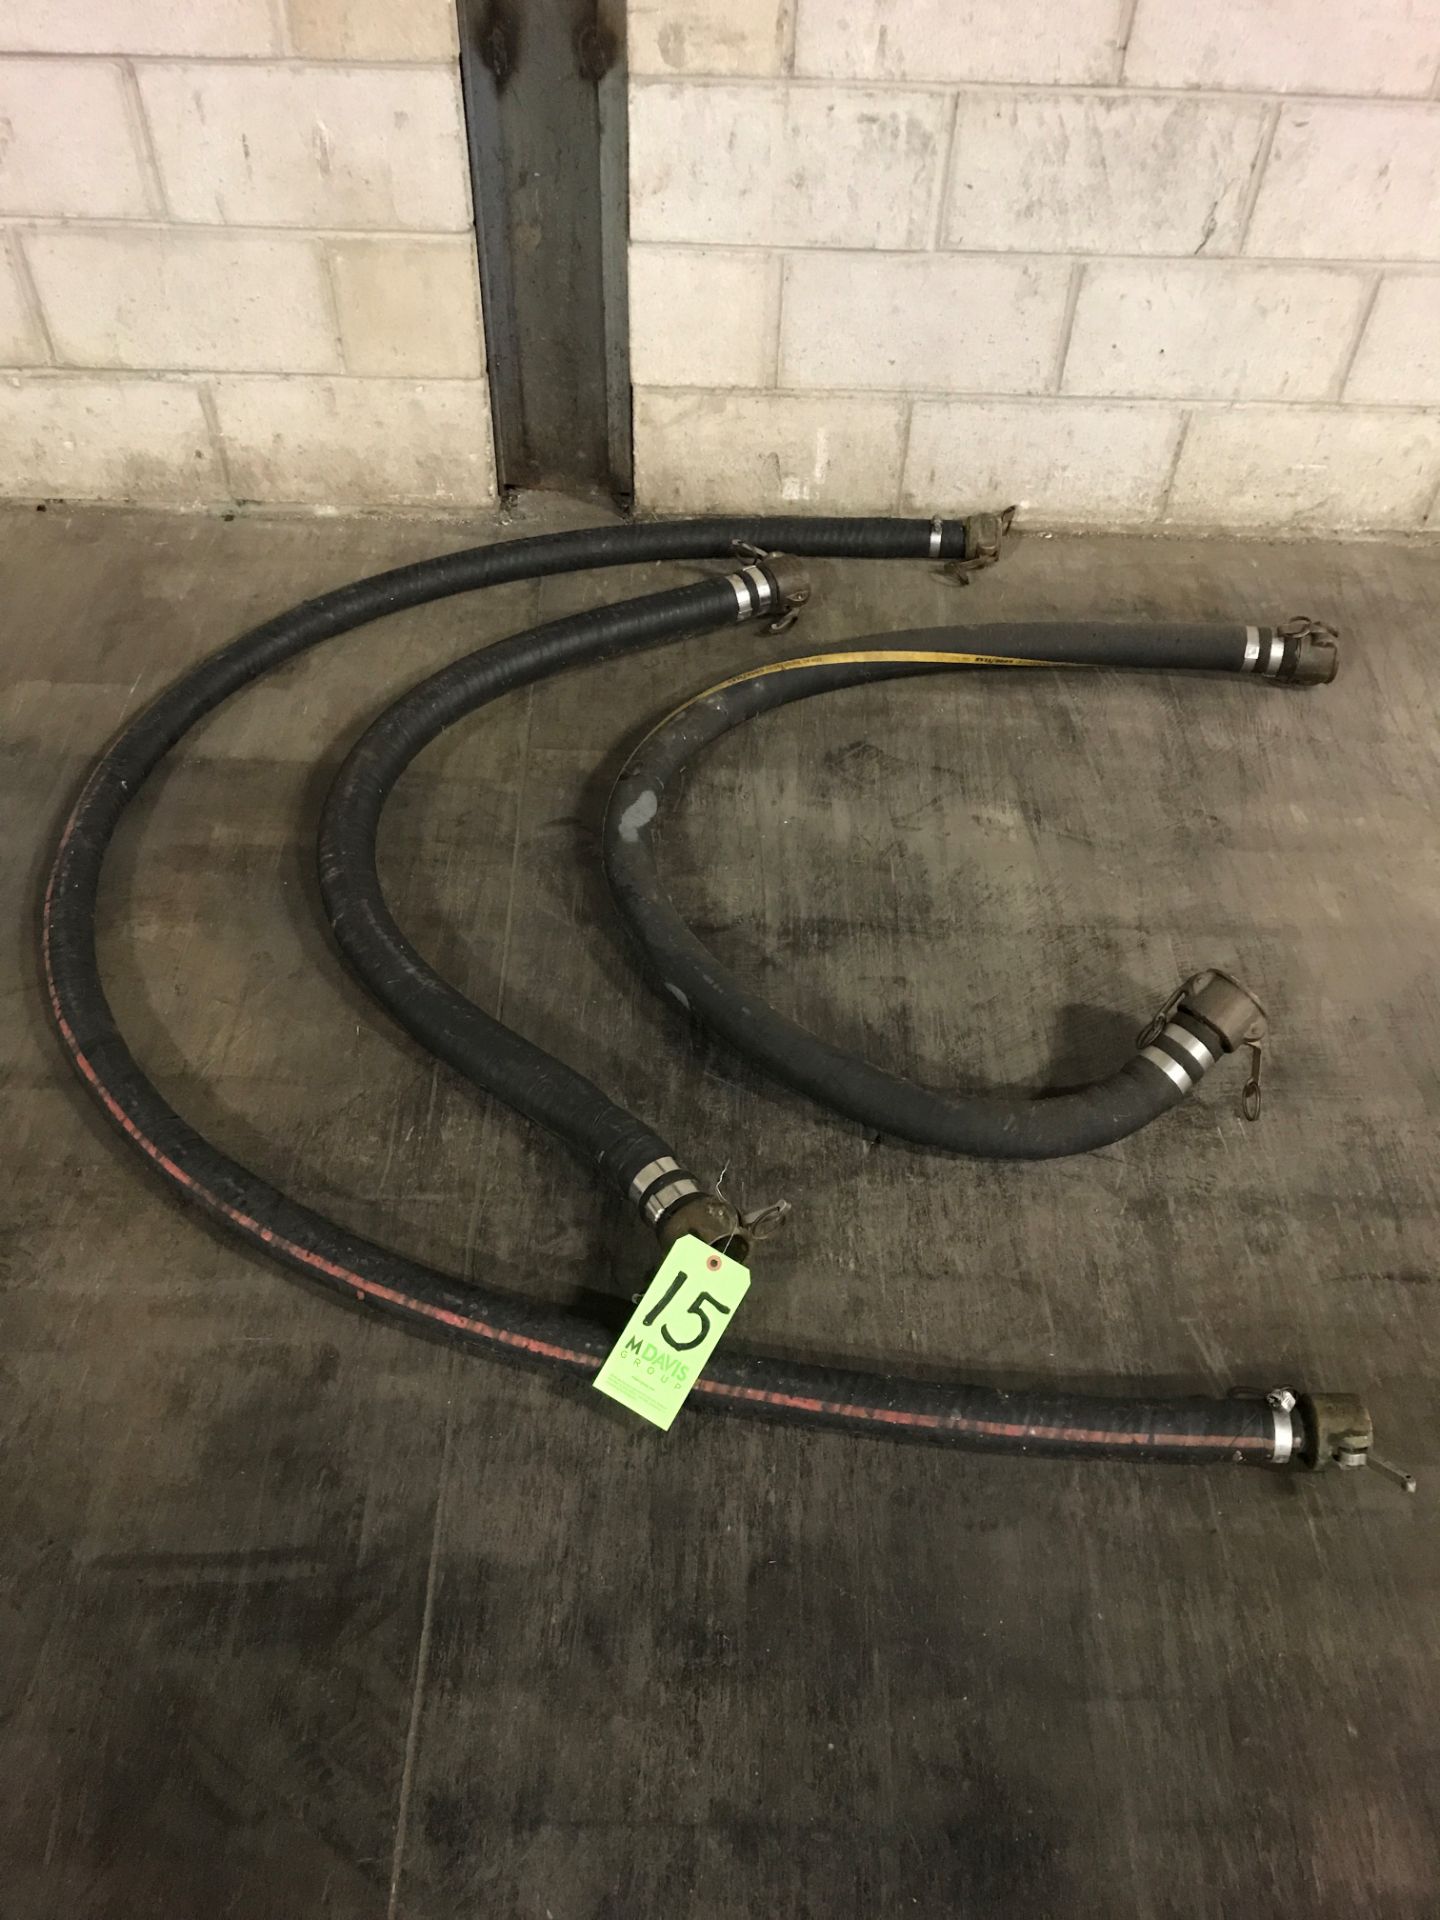 Transfer Hoses with Camlock Connections